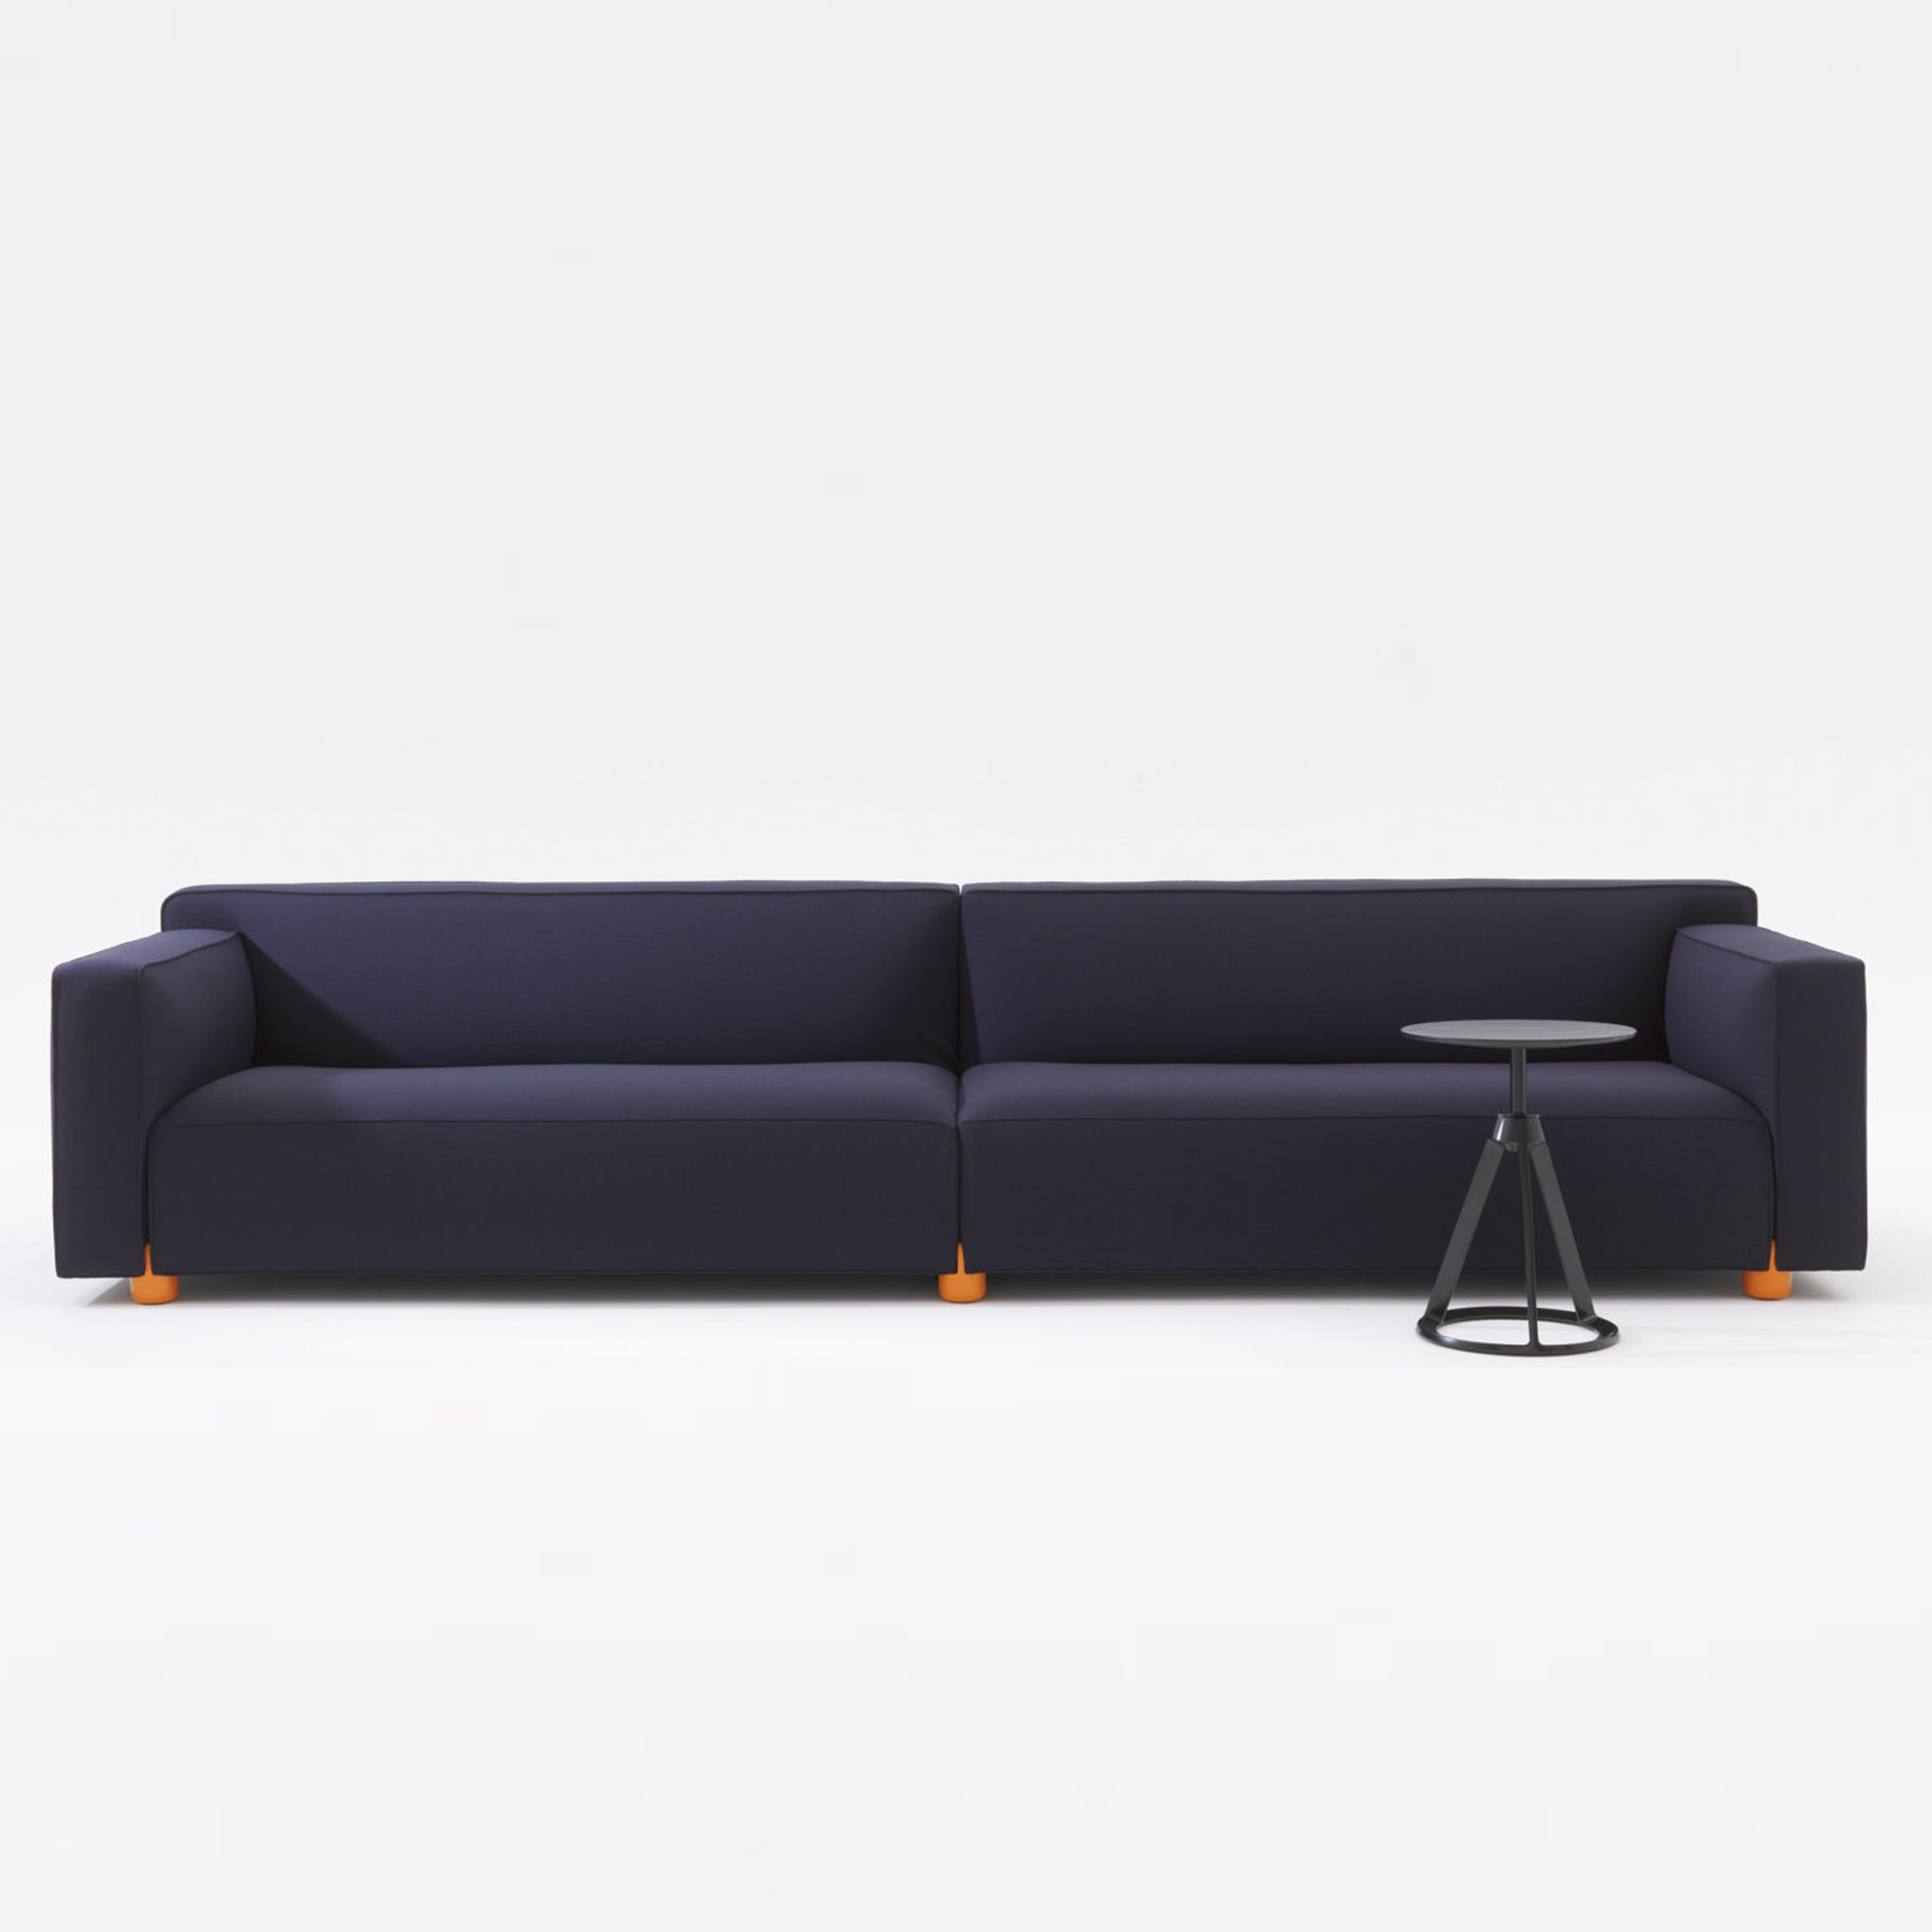 Barber Osgerby 4 Seater Sofa by Knoll